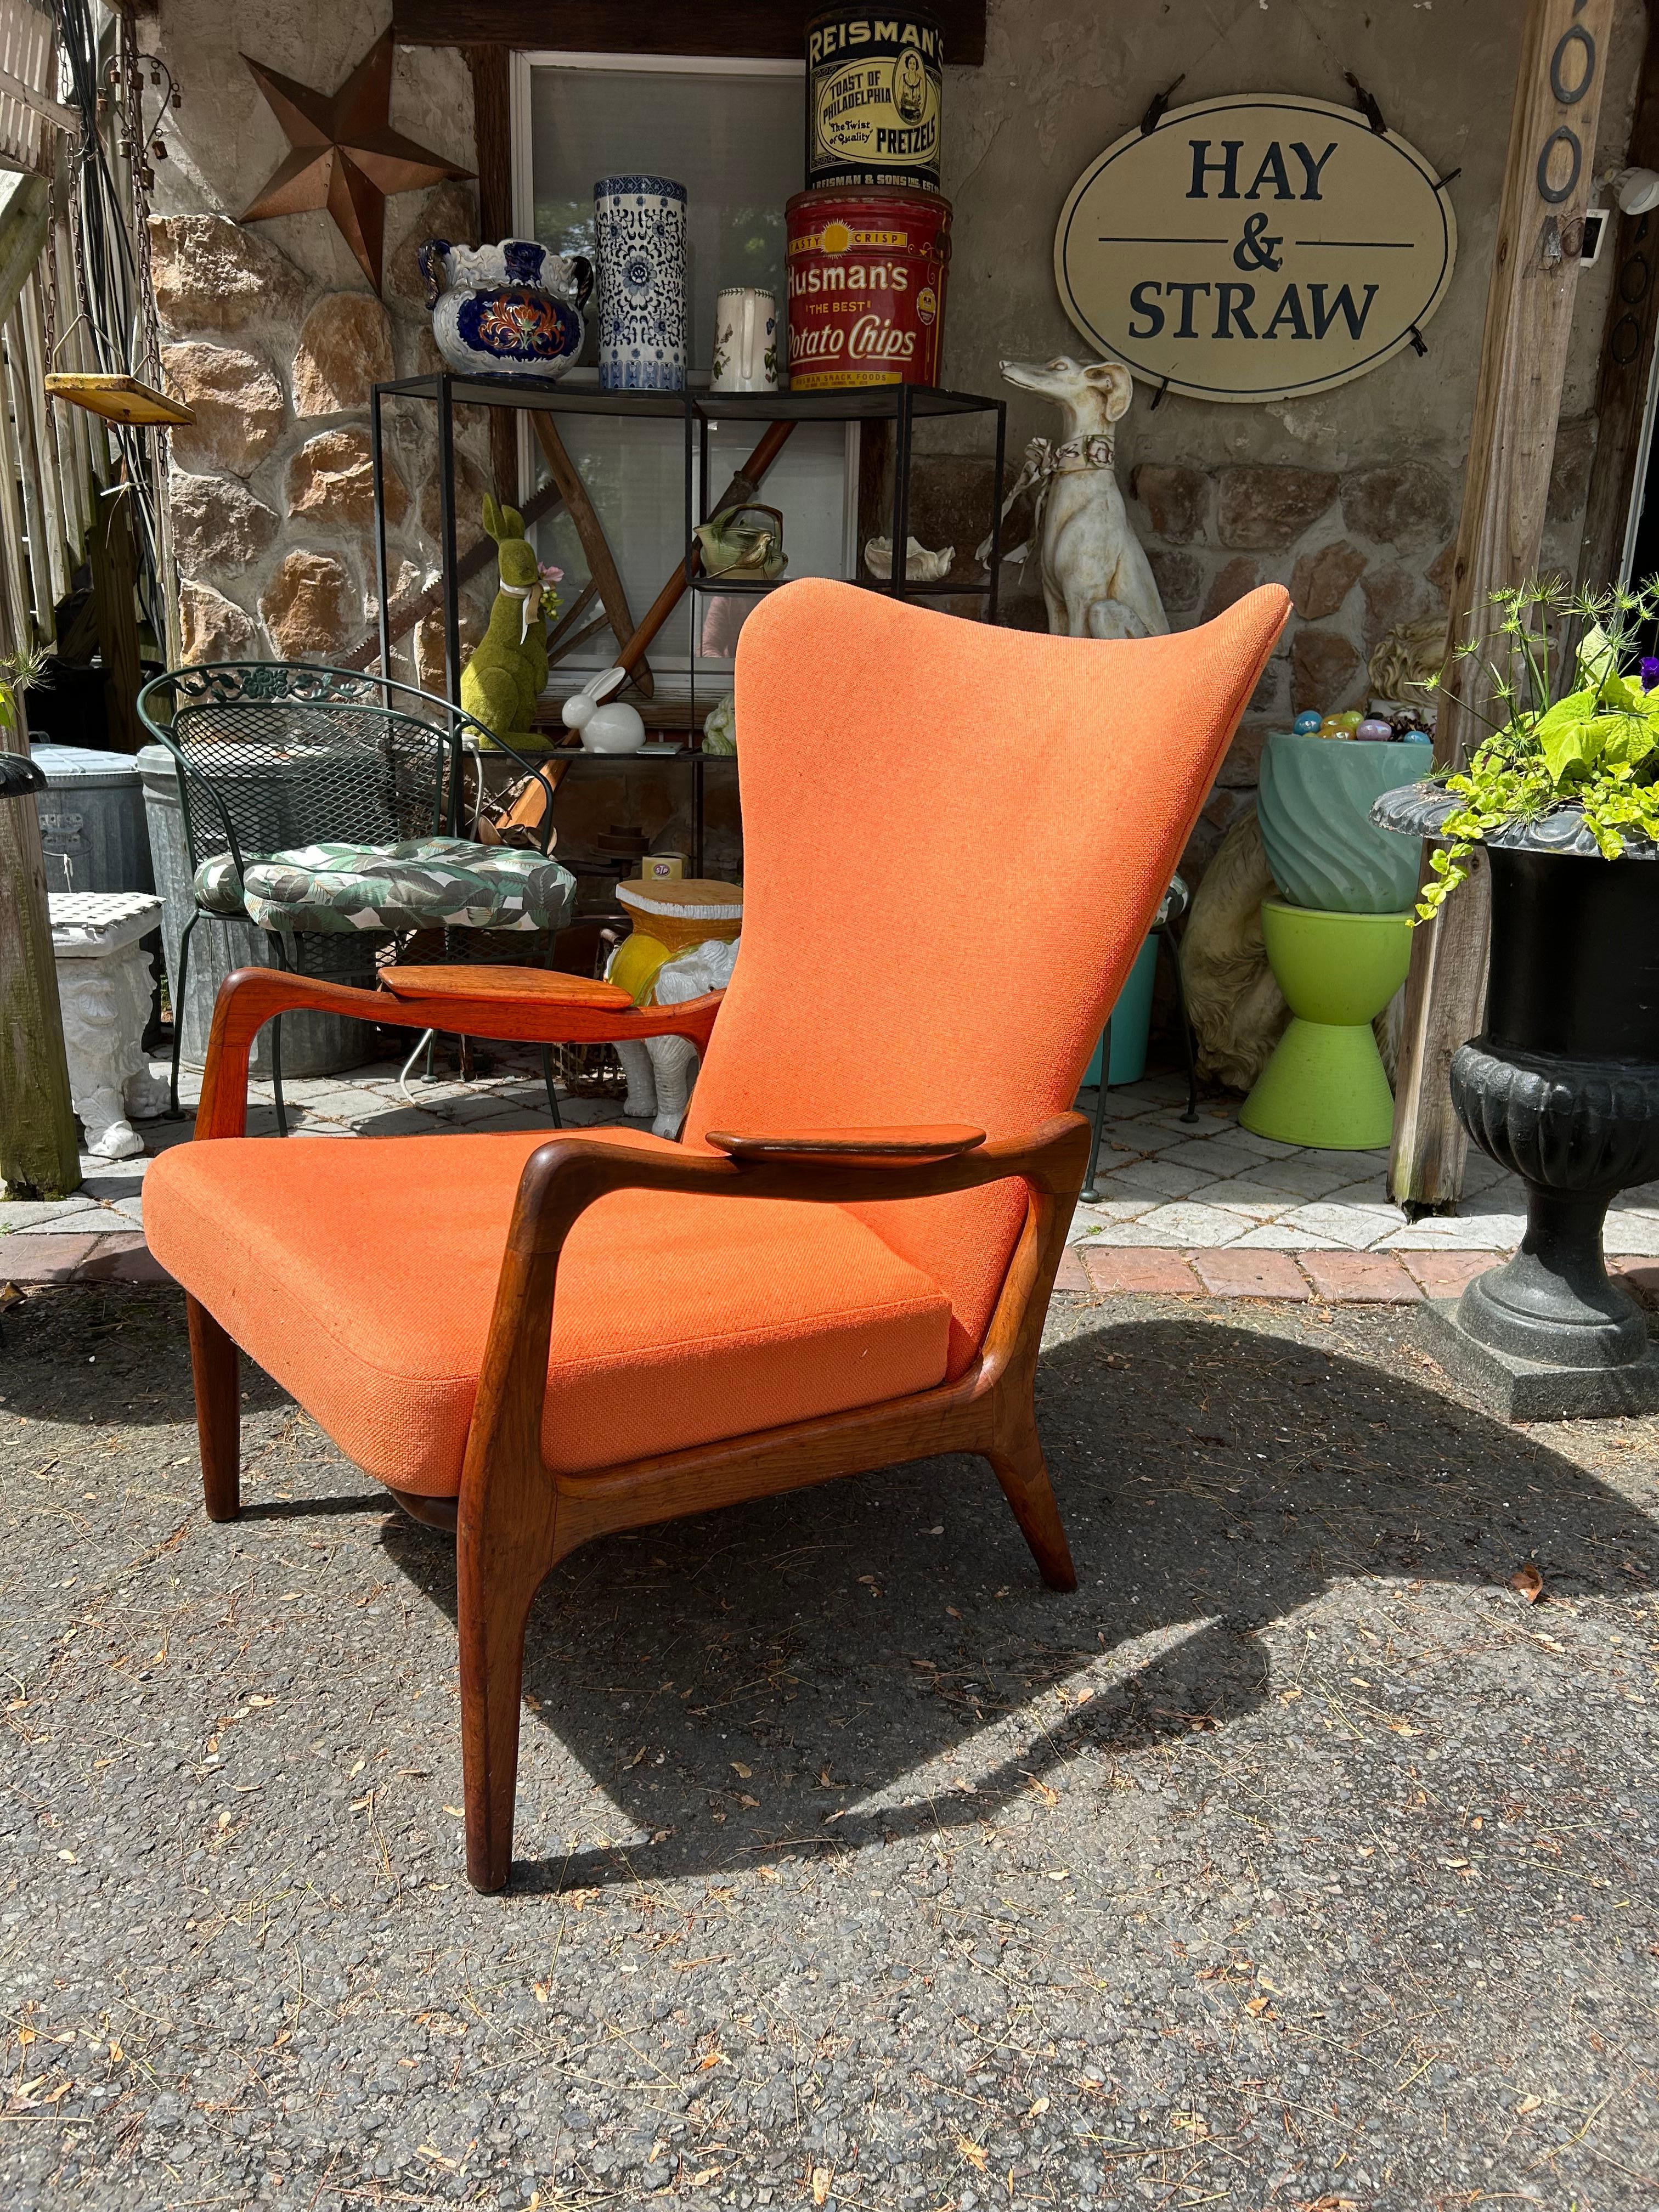 Stylish Adrian Pearsall sculptural walnut wing back chair.  The original tangerine orange wool upholstery looks presentable with only some light wear-cleaning recommended.  The rubber straps look newer and still work great.  This chair measures 37